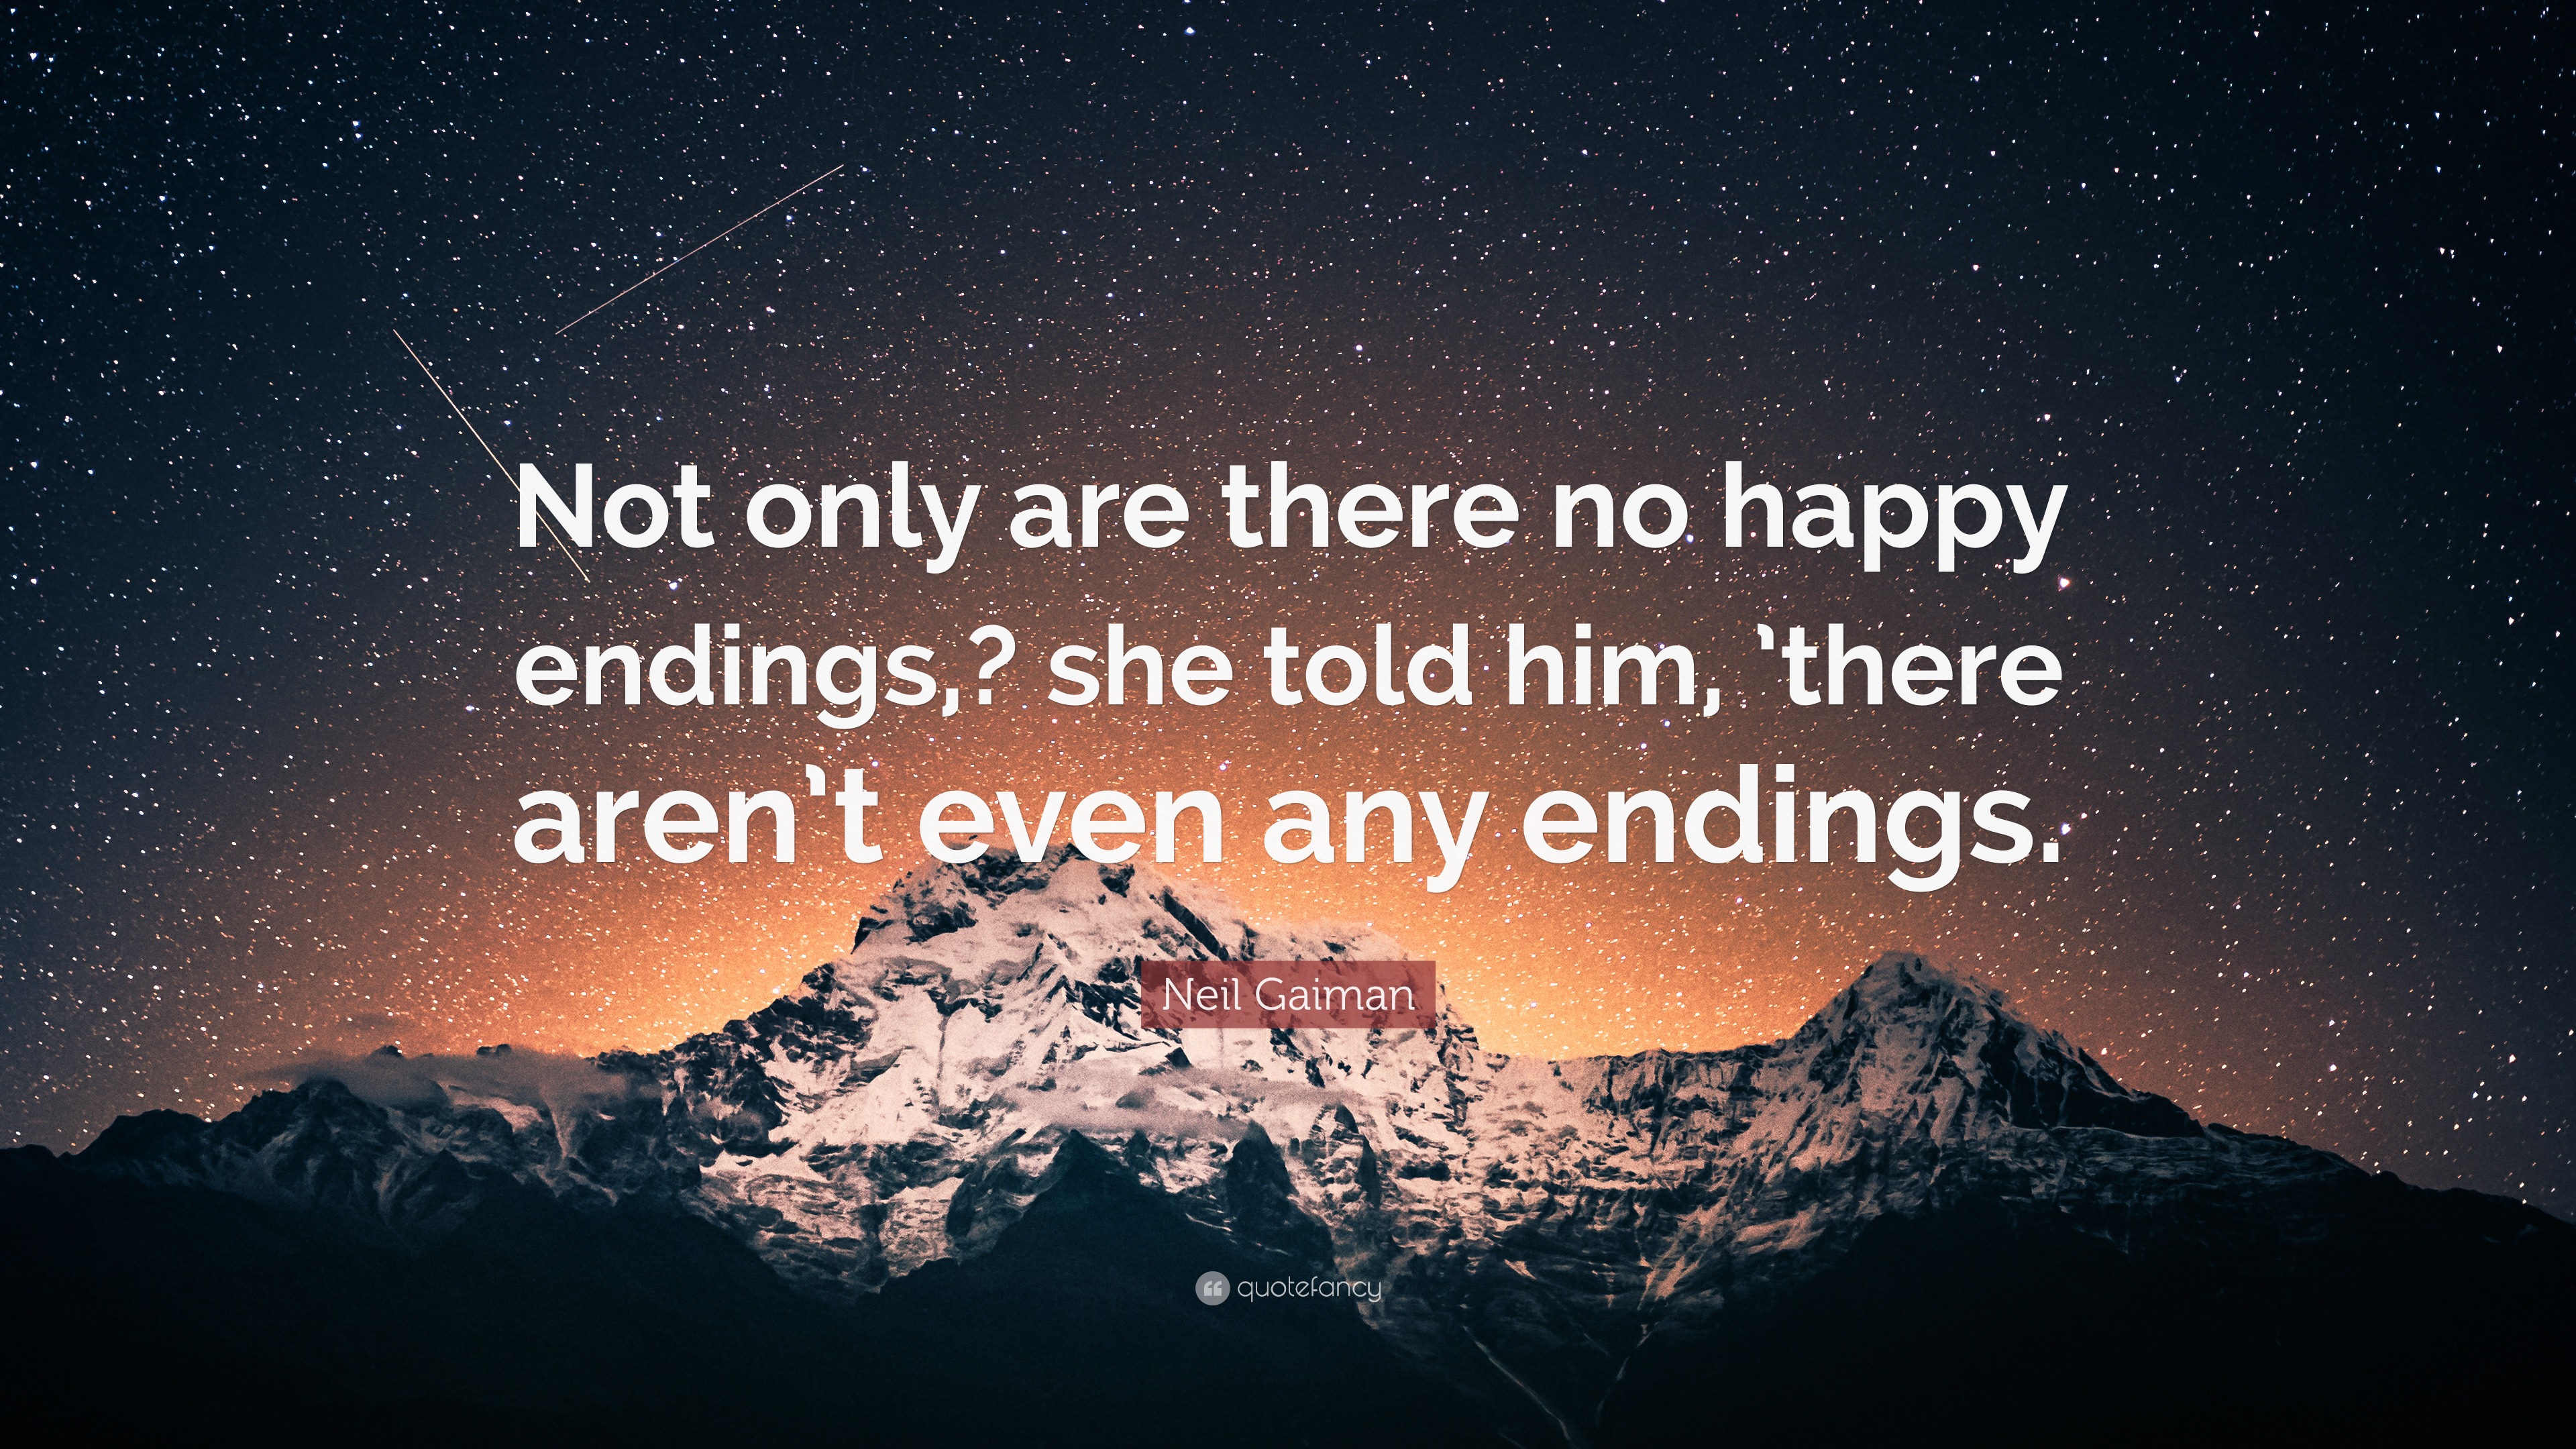 Quote About Happy Endings - Jodi Picoult Quote: "Everyone deserves a